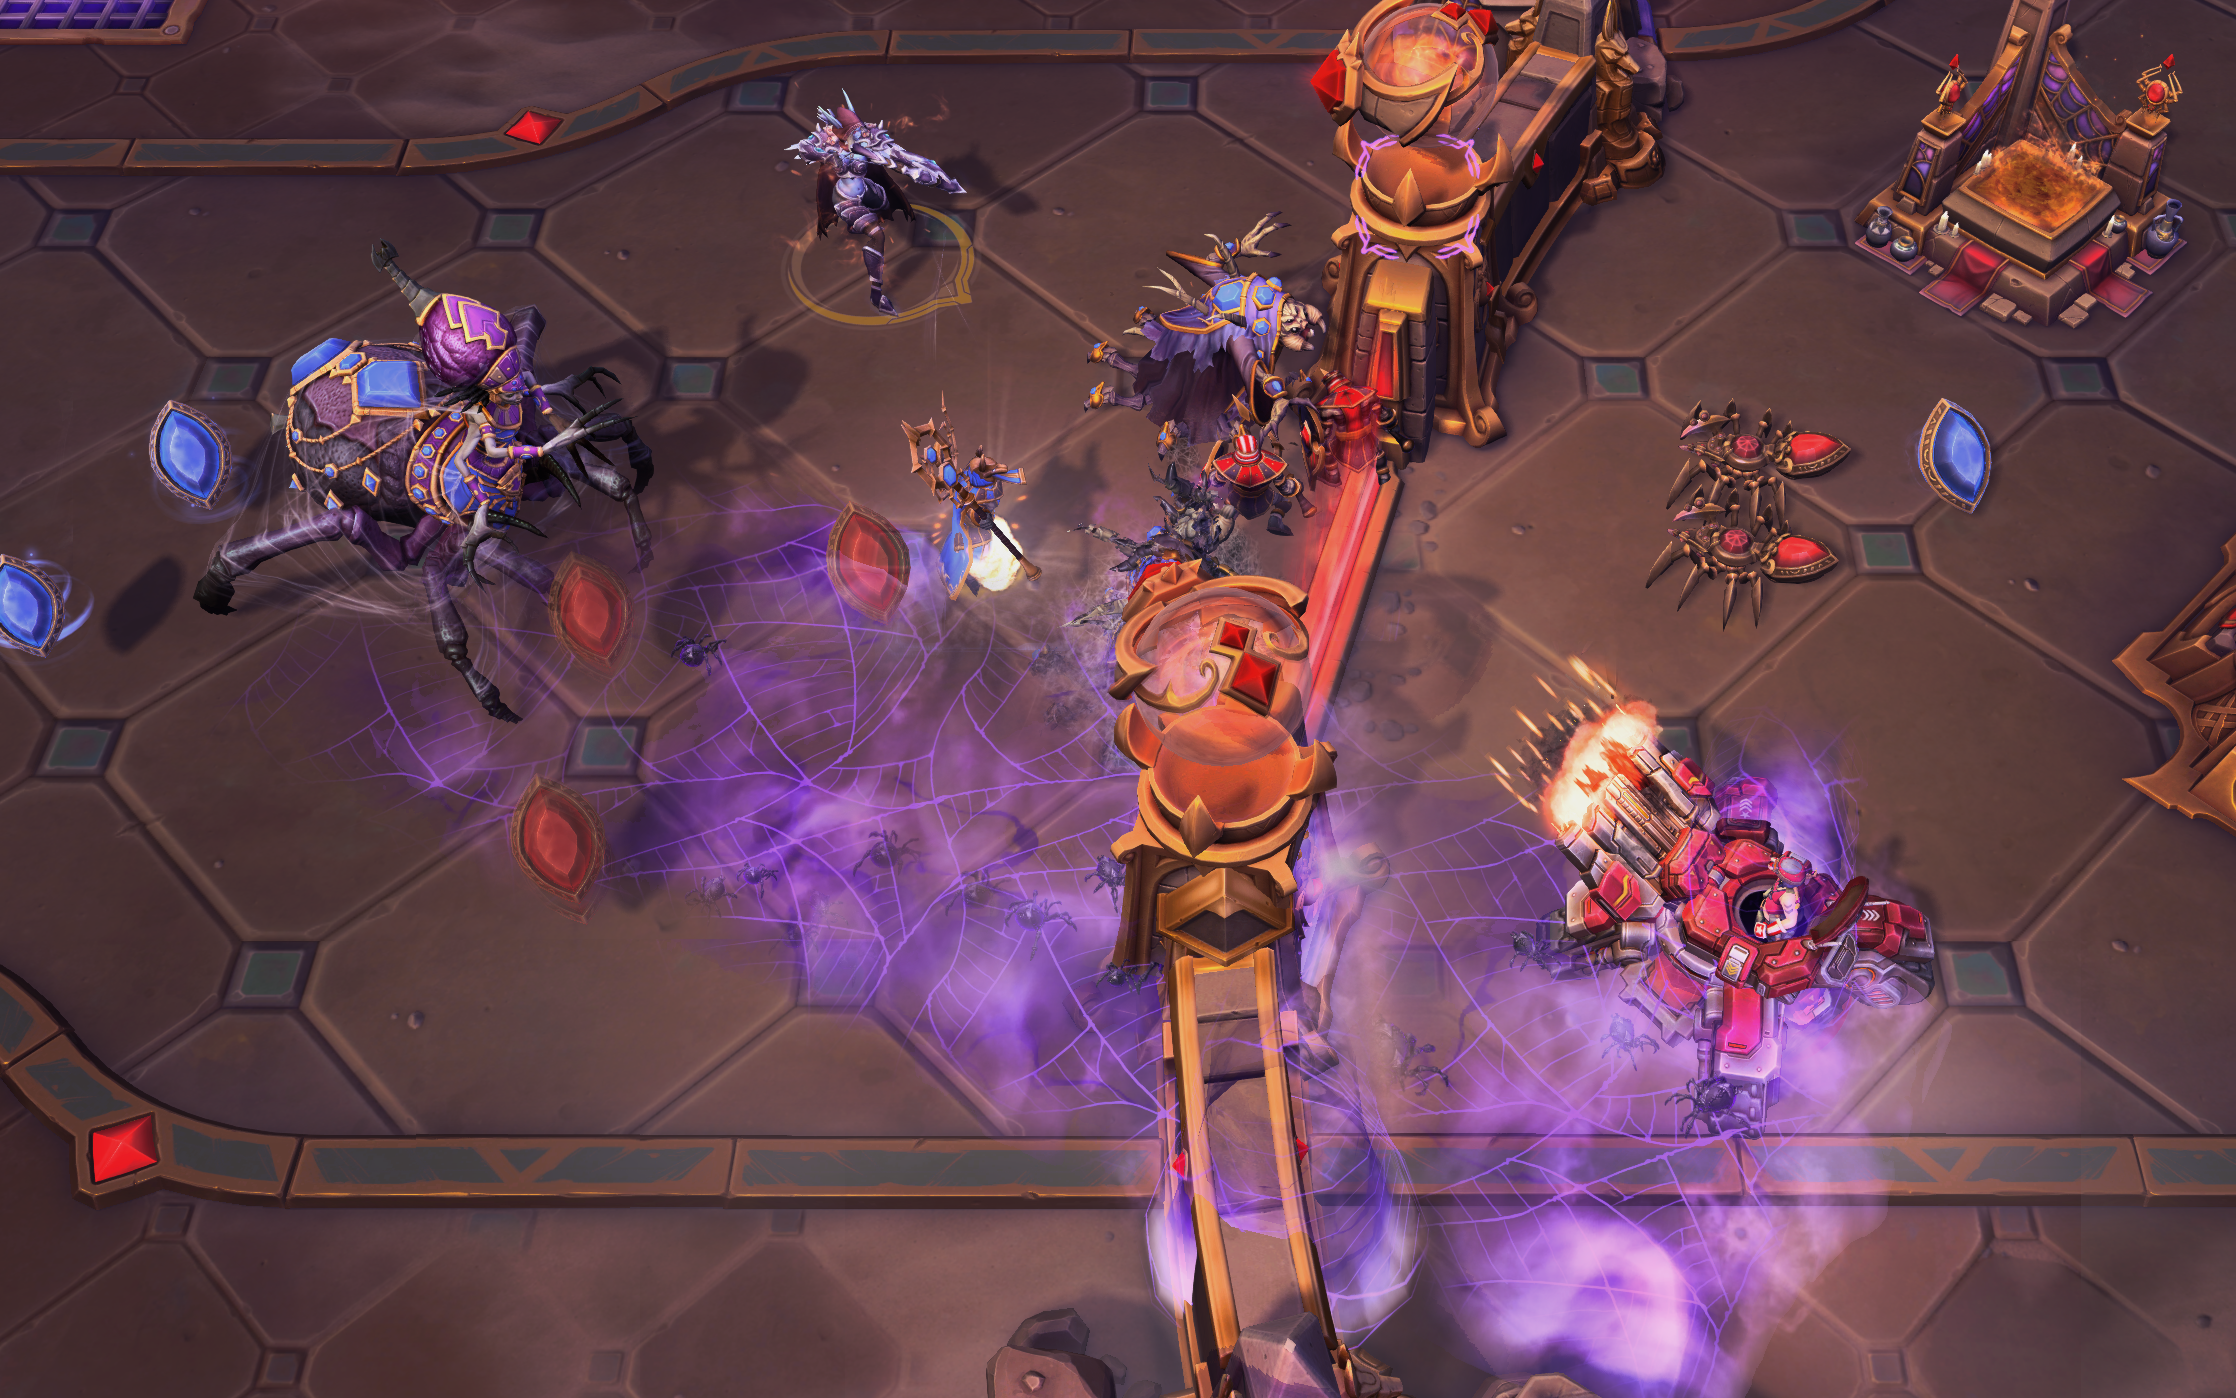 Review: Heroes of the Storm